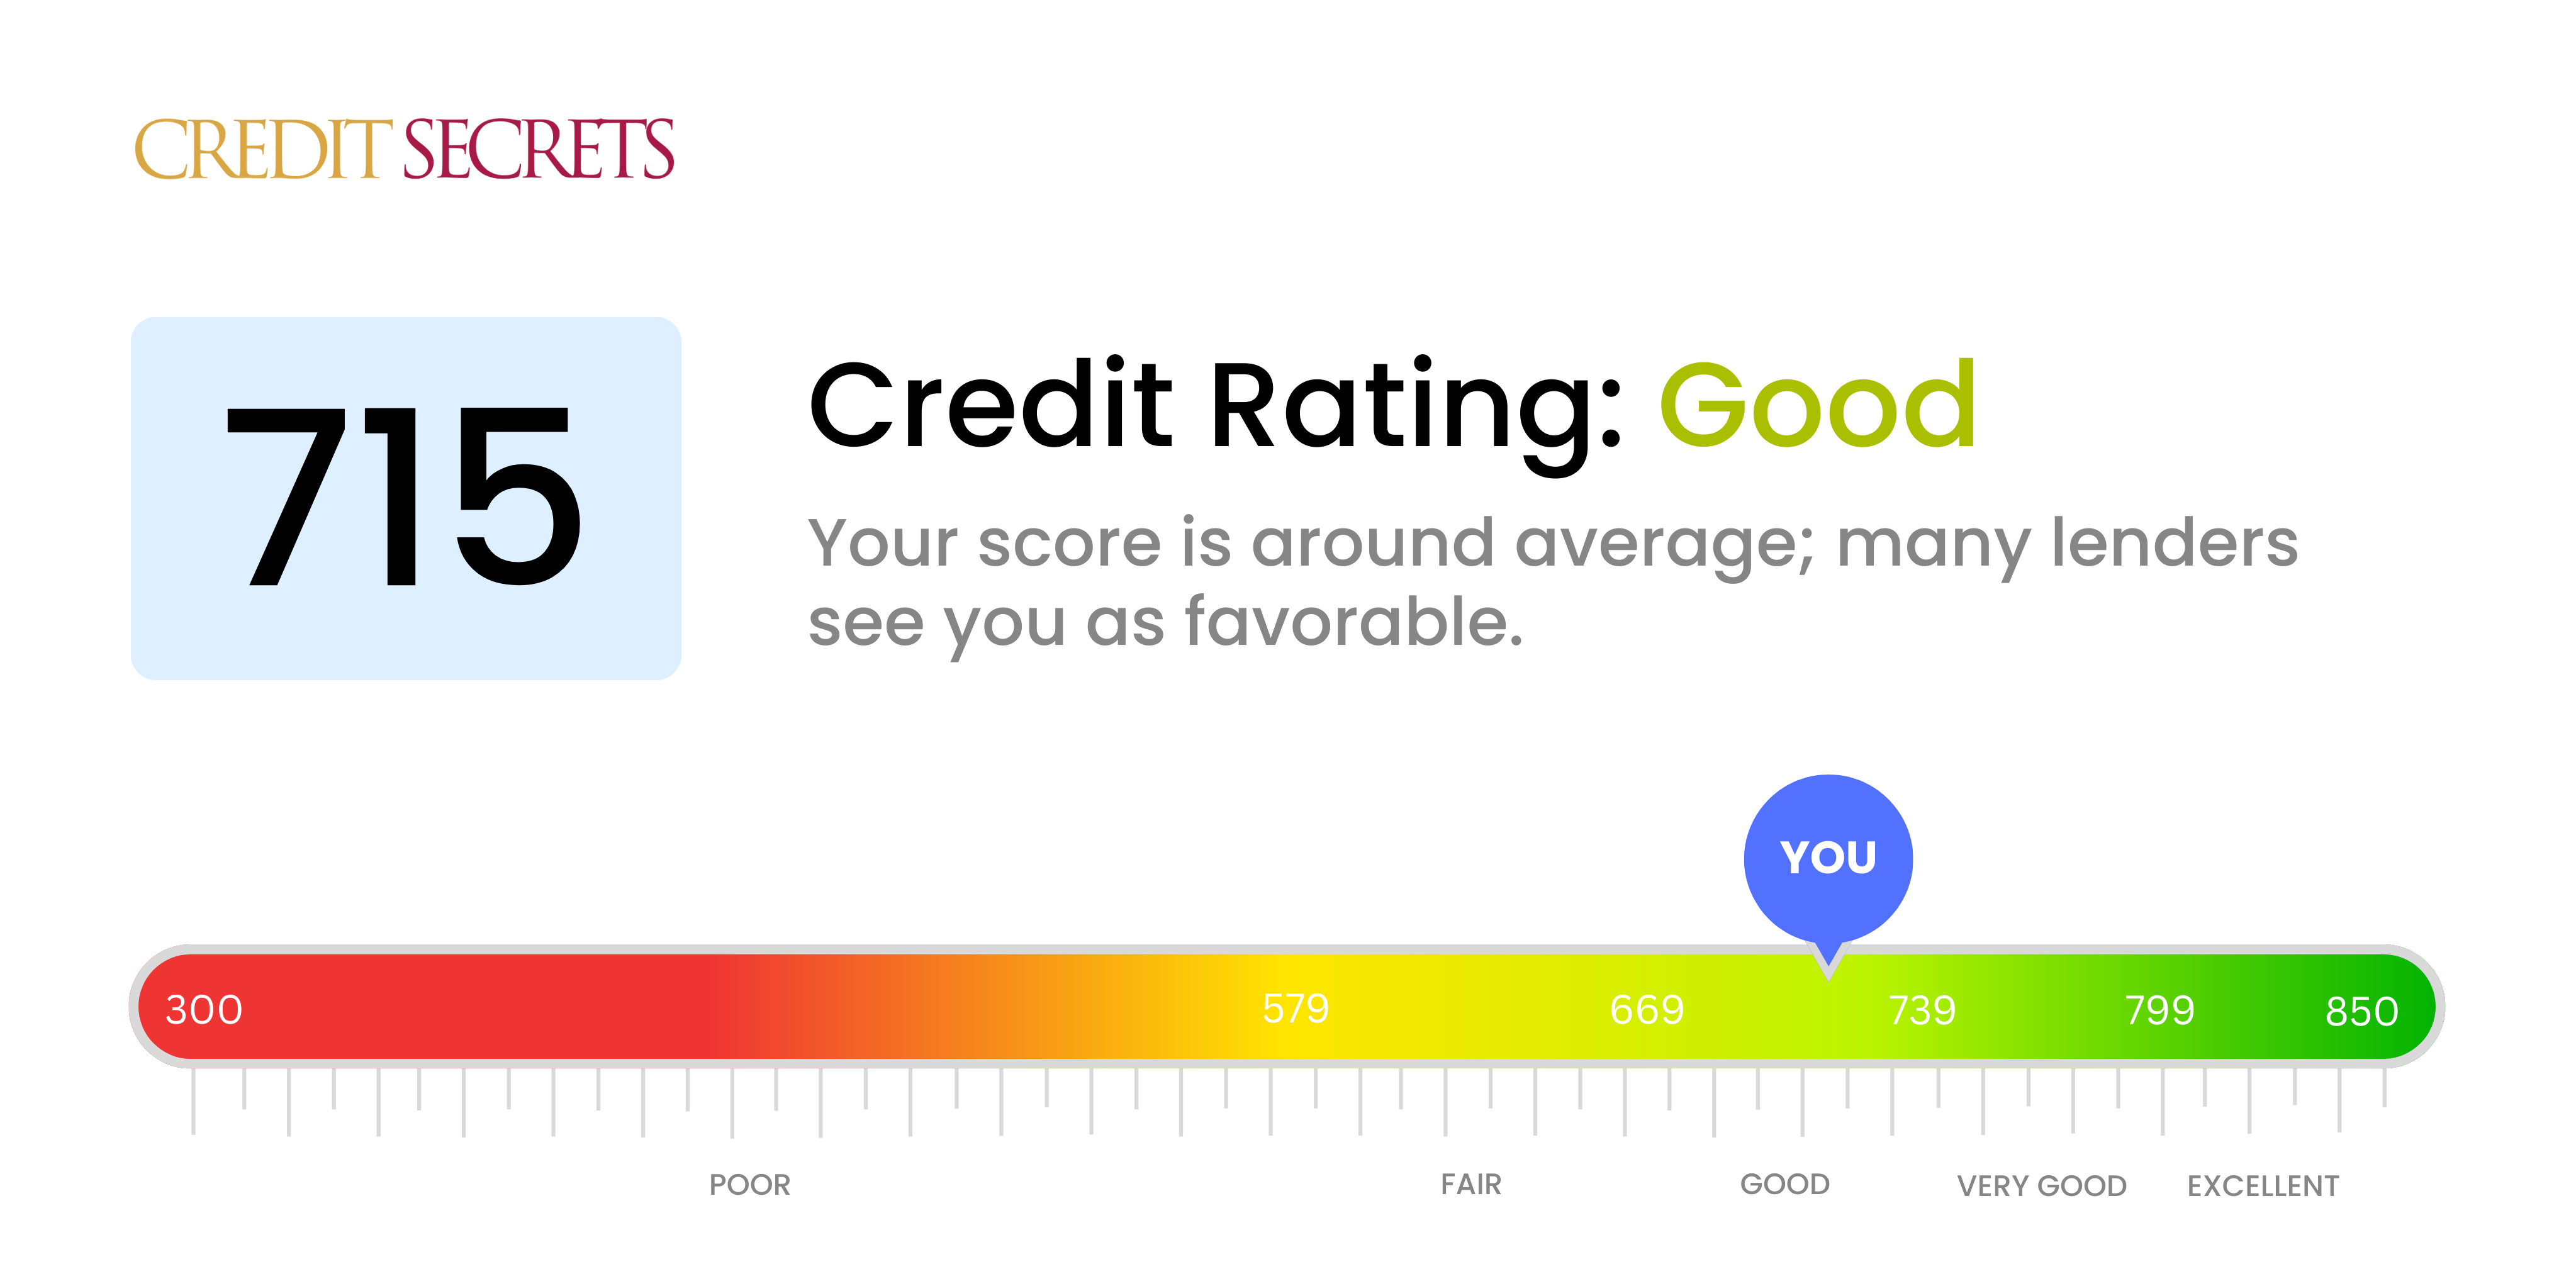 Is 715 a good credit score?